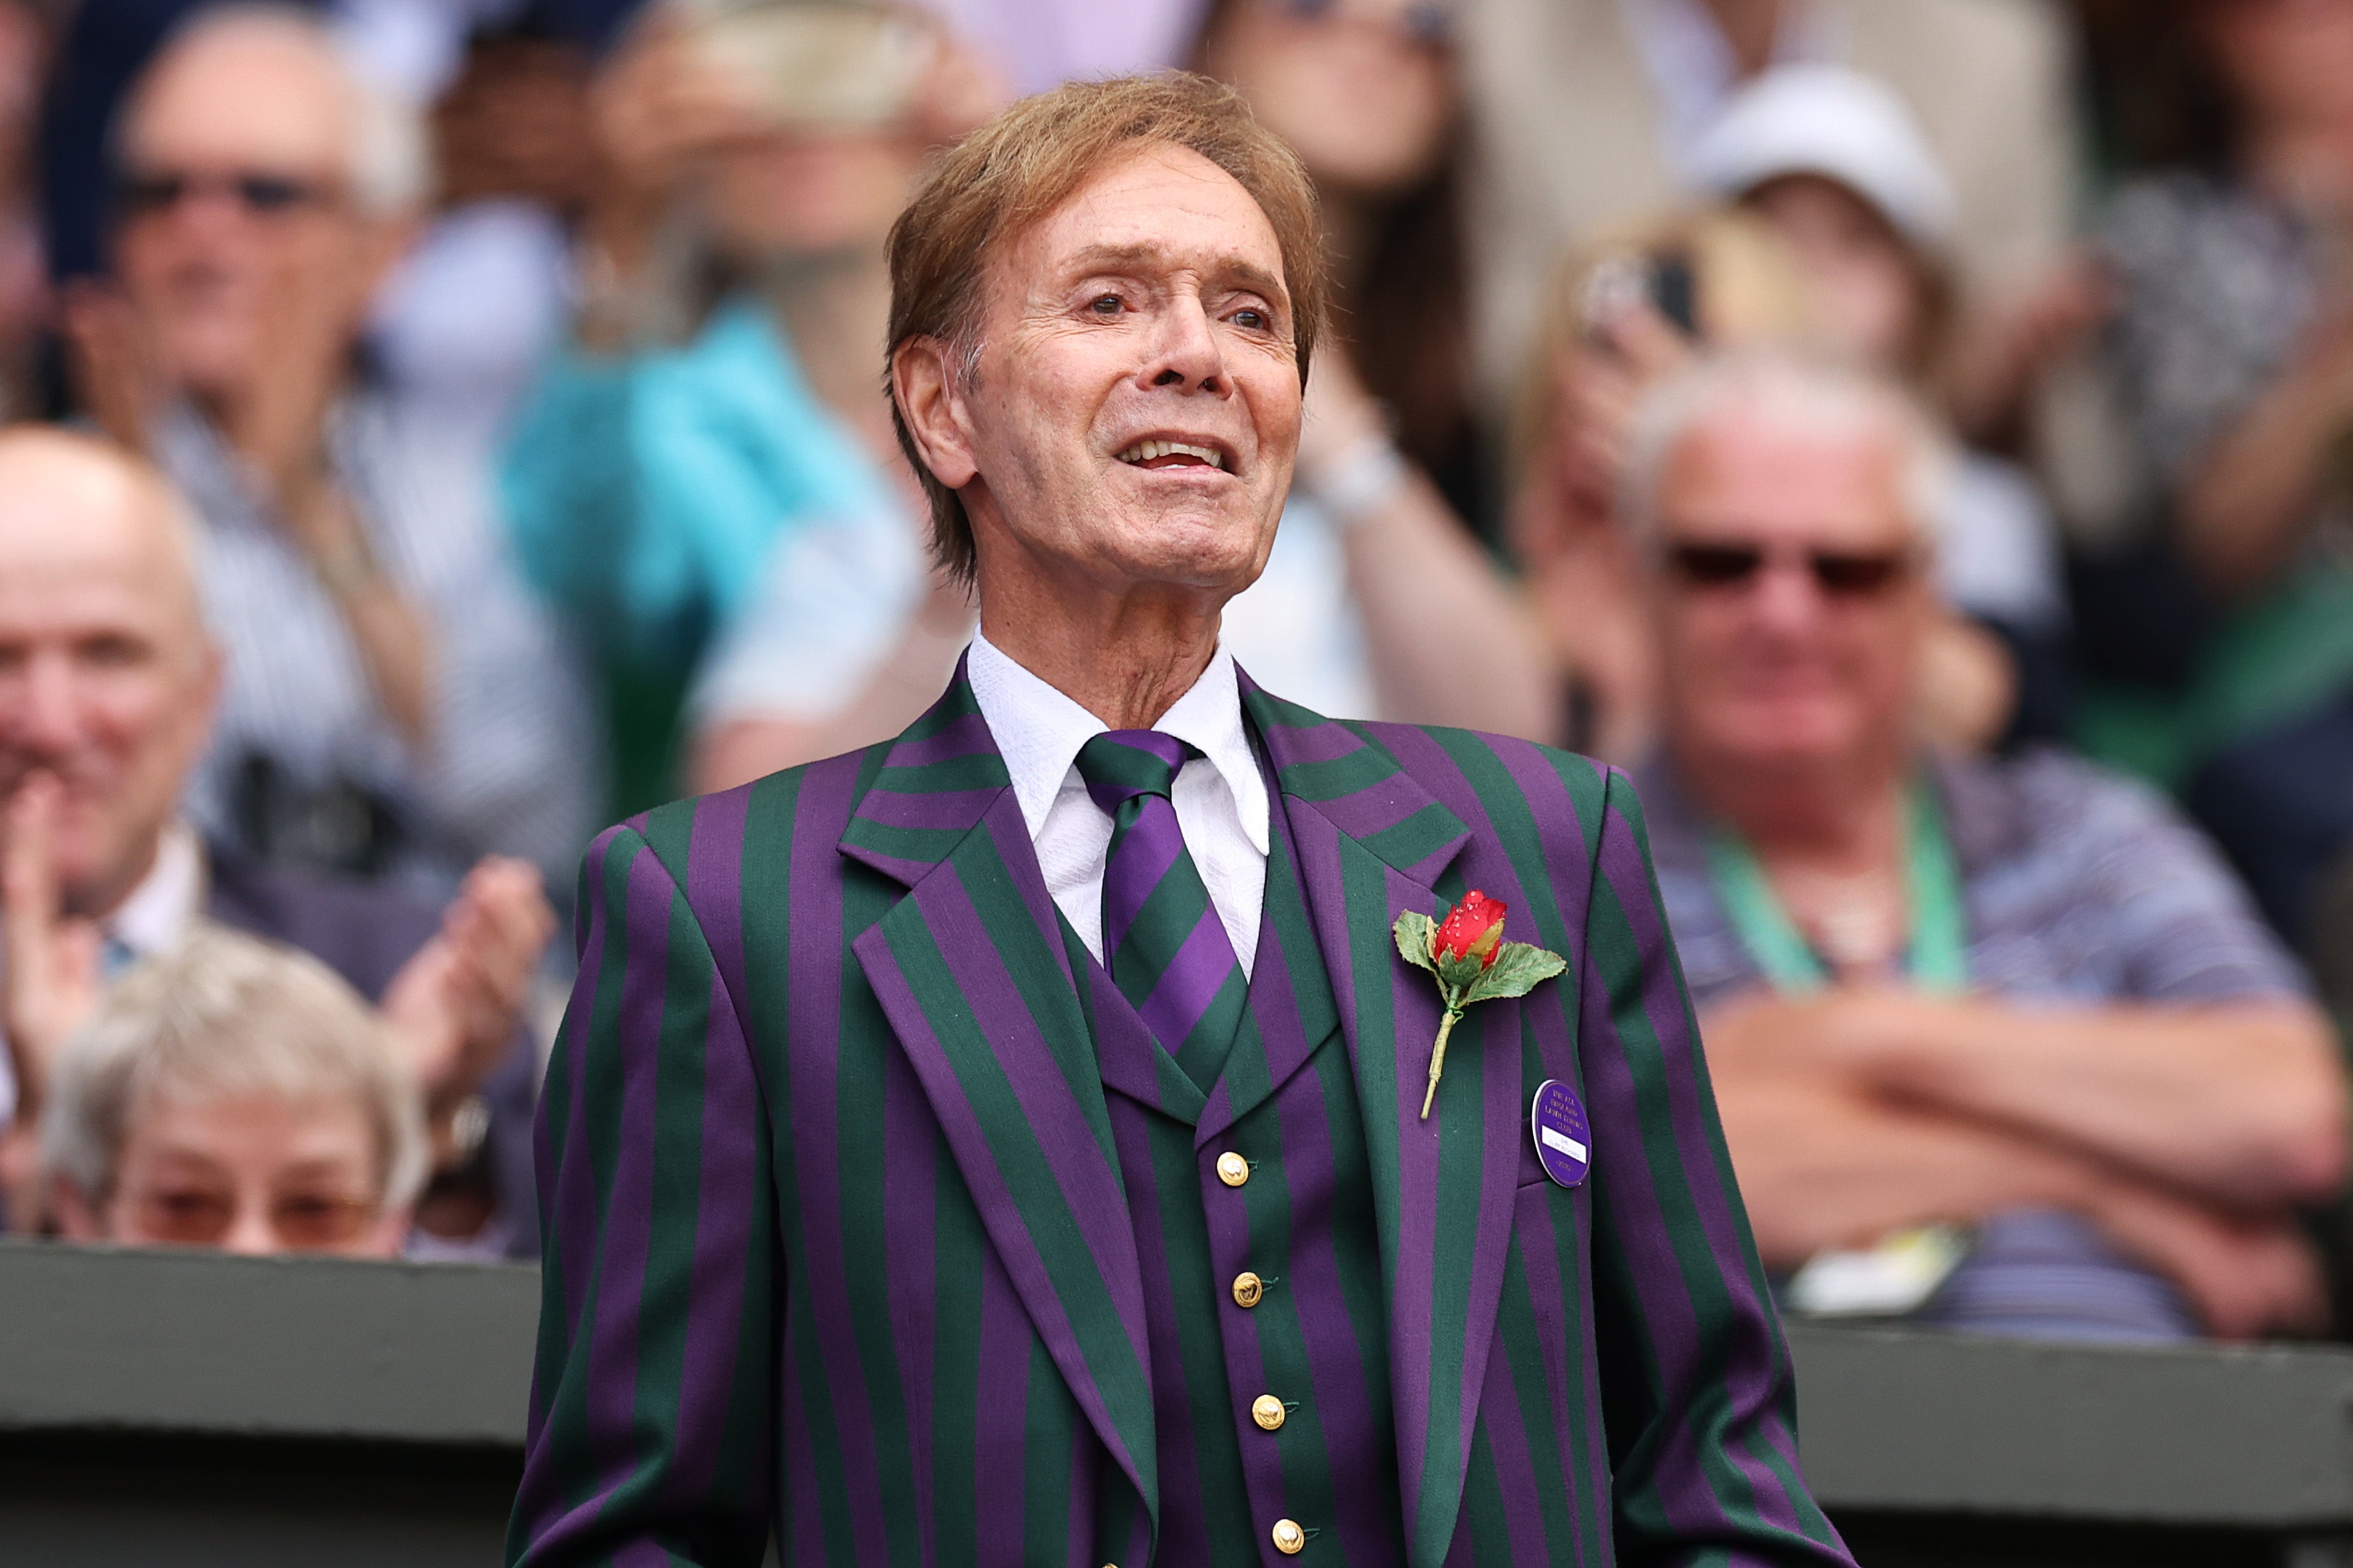 Cliff Richard performs at the Centre Court Centenary Celebration on day seven of The Championships Wimbledon 2022 at All England Lawn Tennis and Croquet Club on July 03, 2022